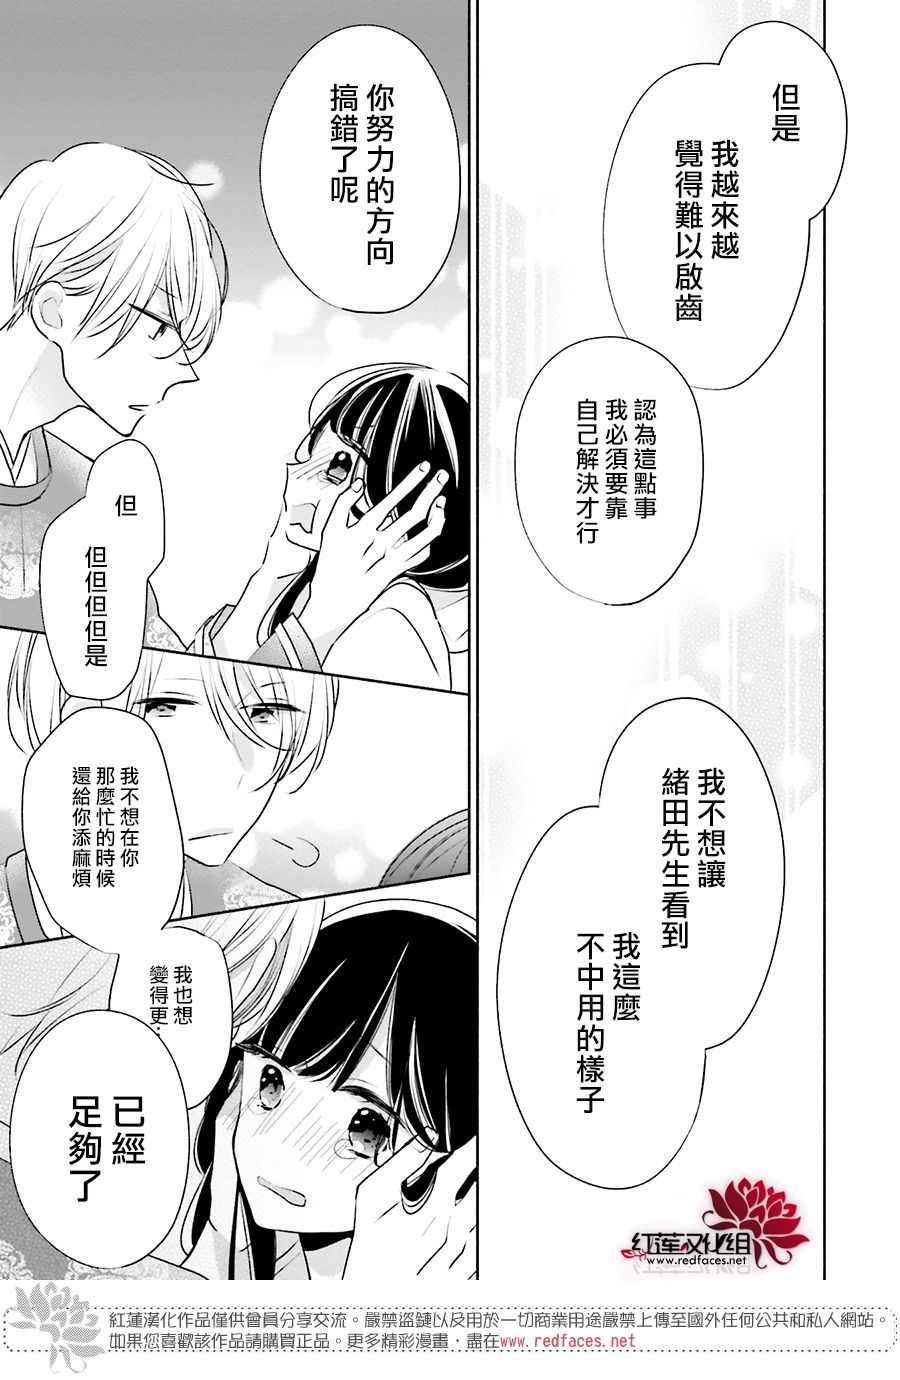 If given a second chance - 24話 - 2